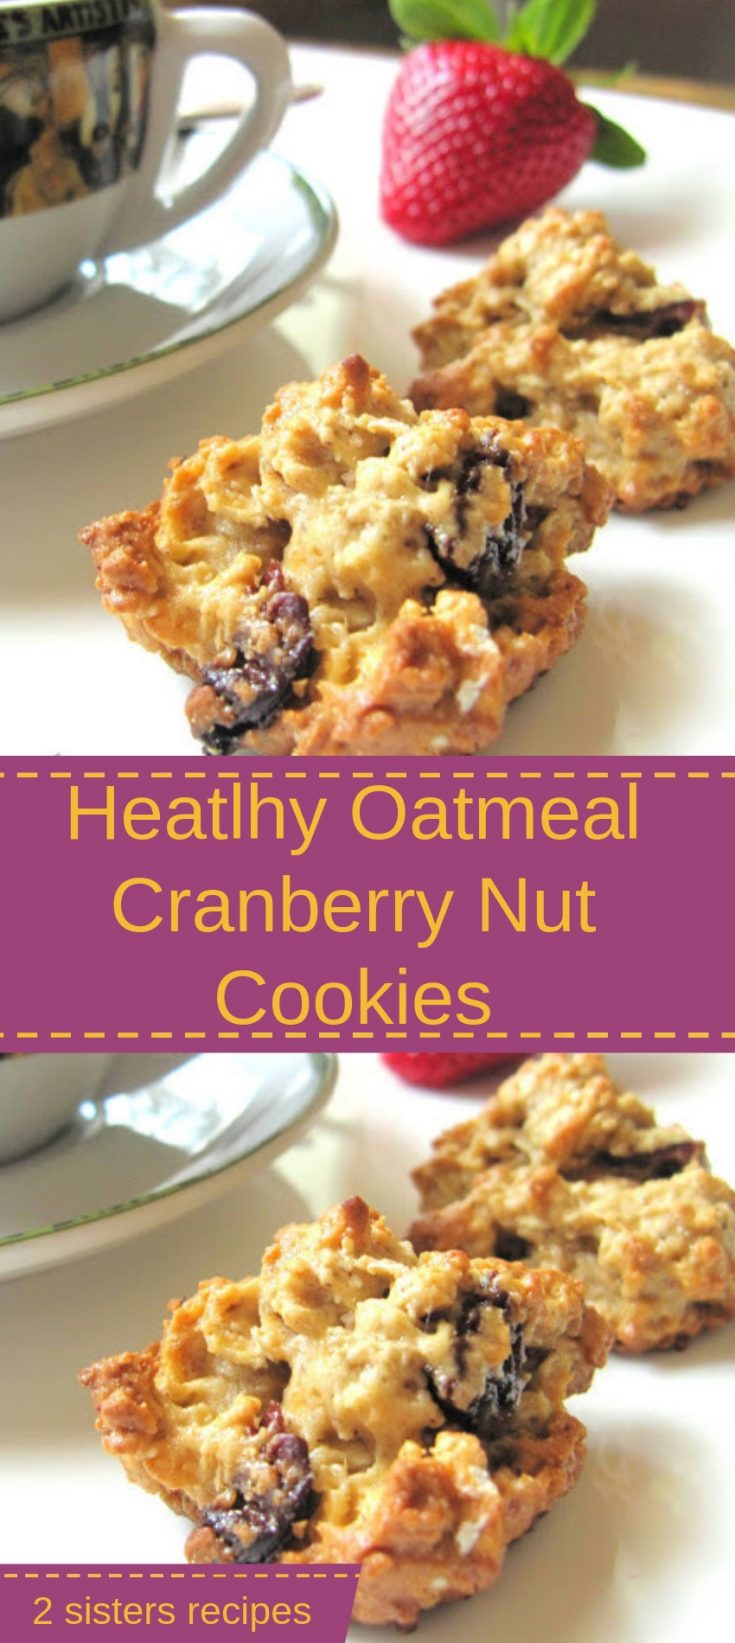 Healthy Cranberry Nut Cookies by 2sistersrecipes.com